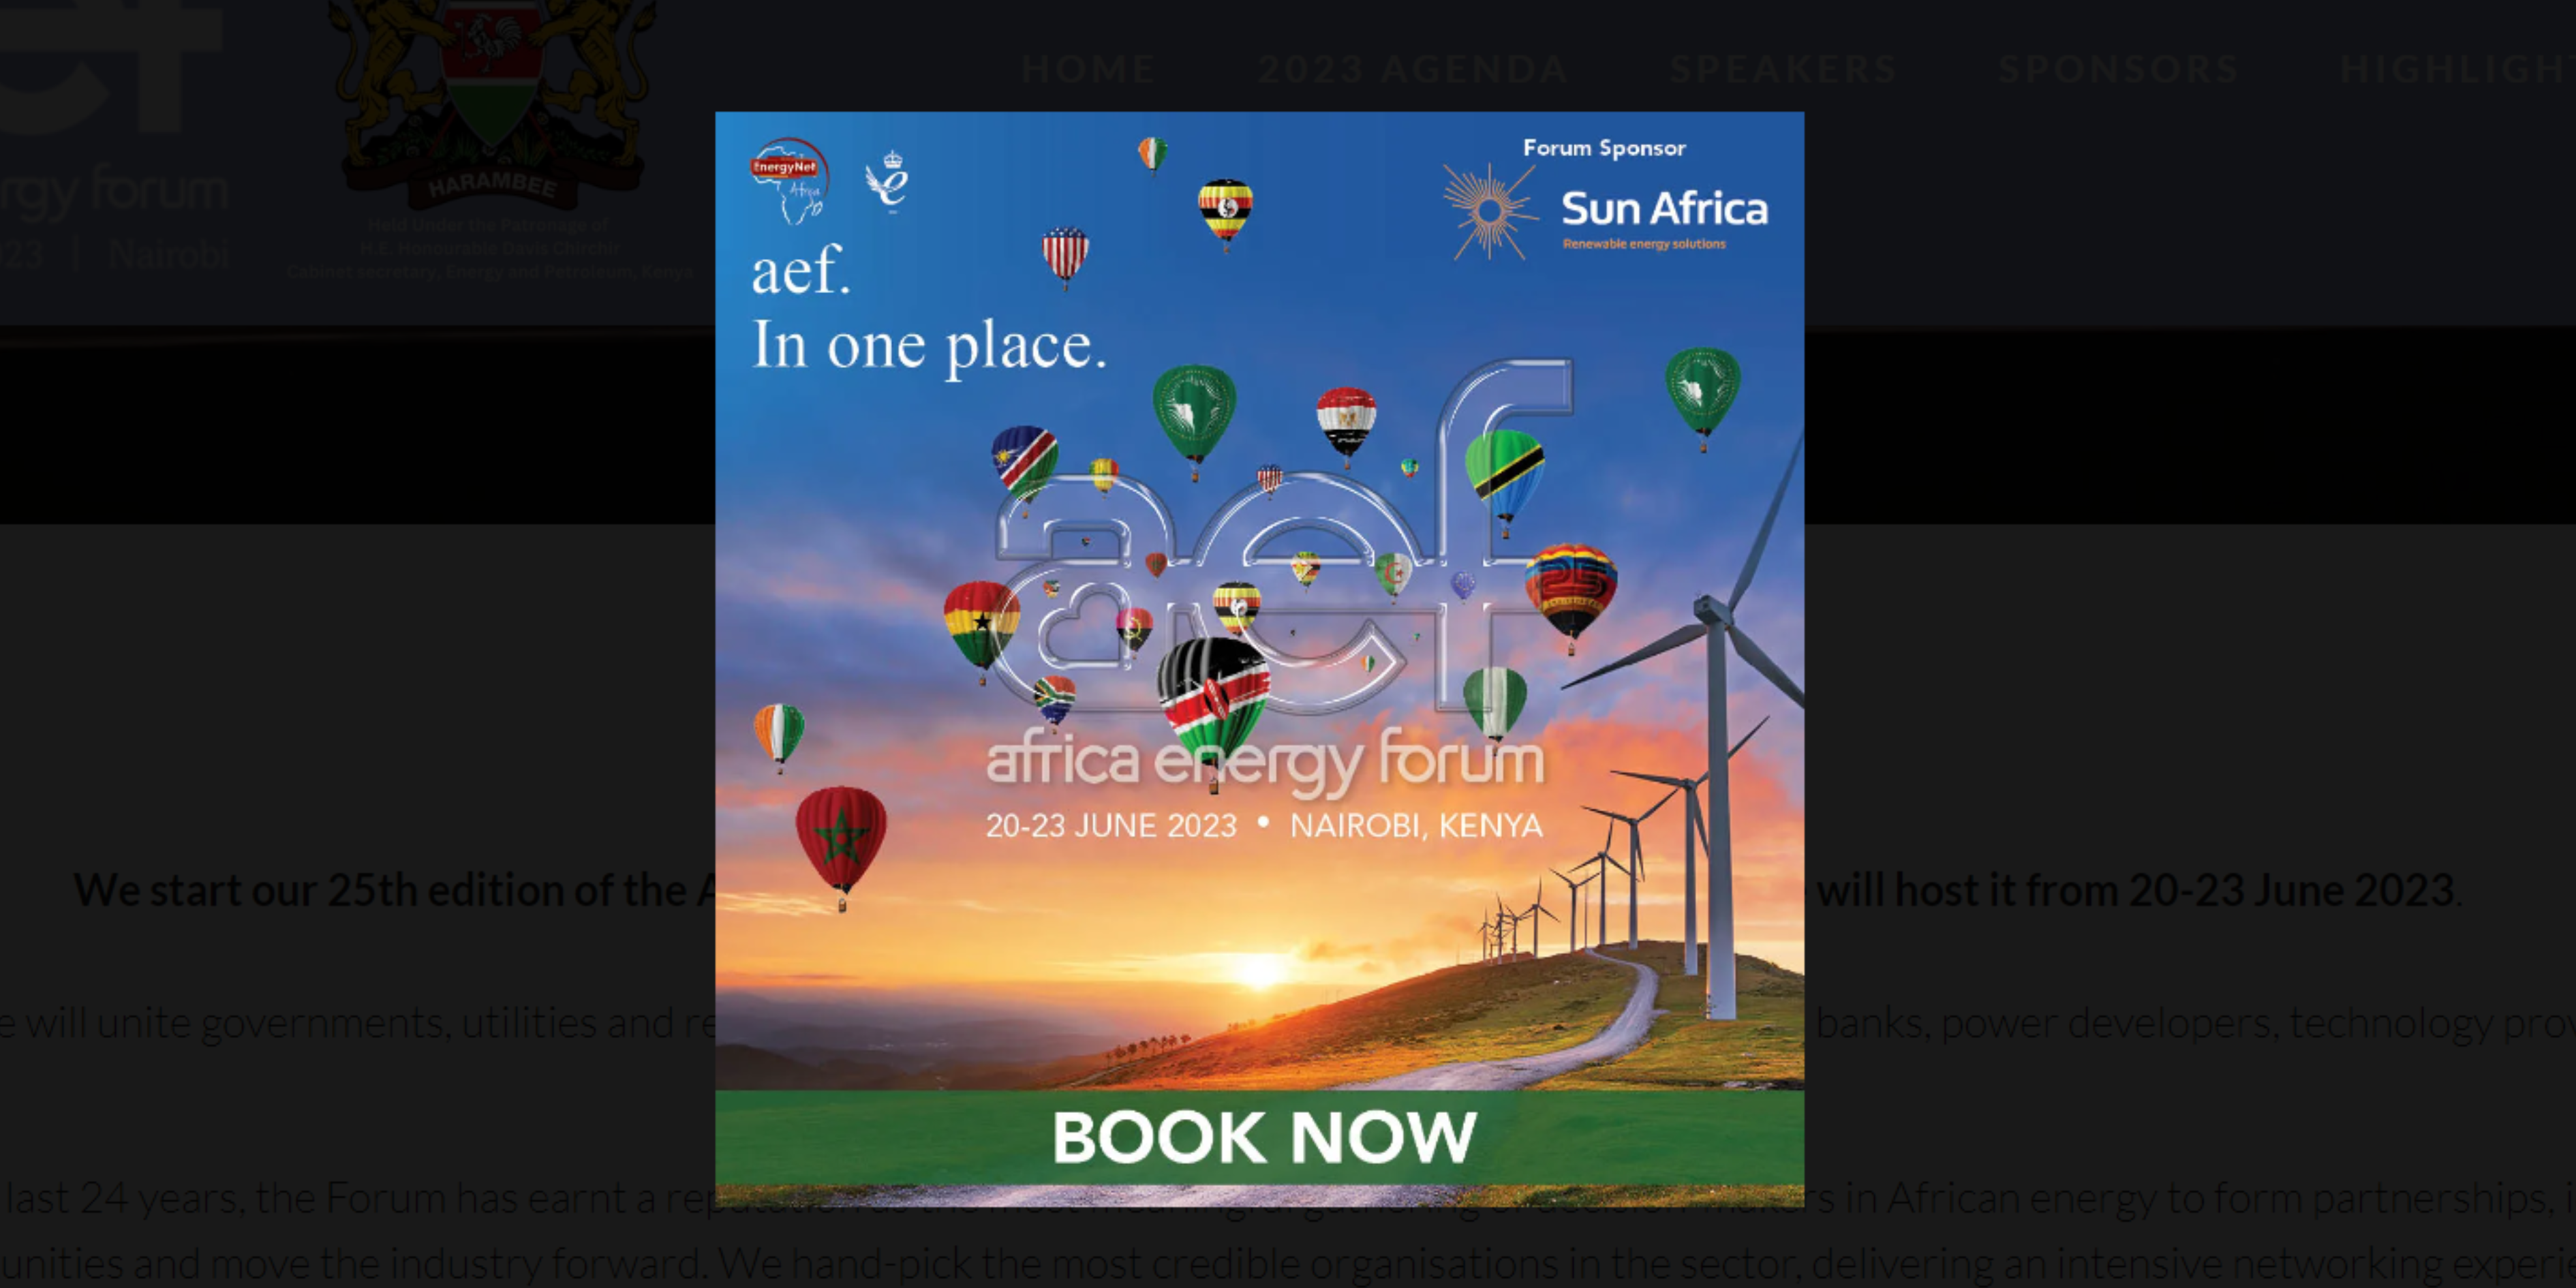 Kenya Ready for Africa Energy Forum, aef2023 to be Held in Nairobi for the First Time